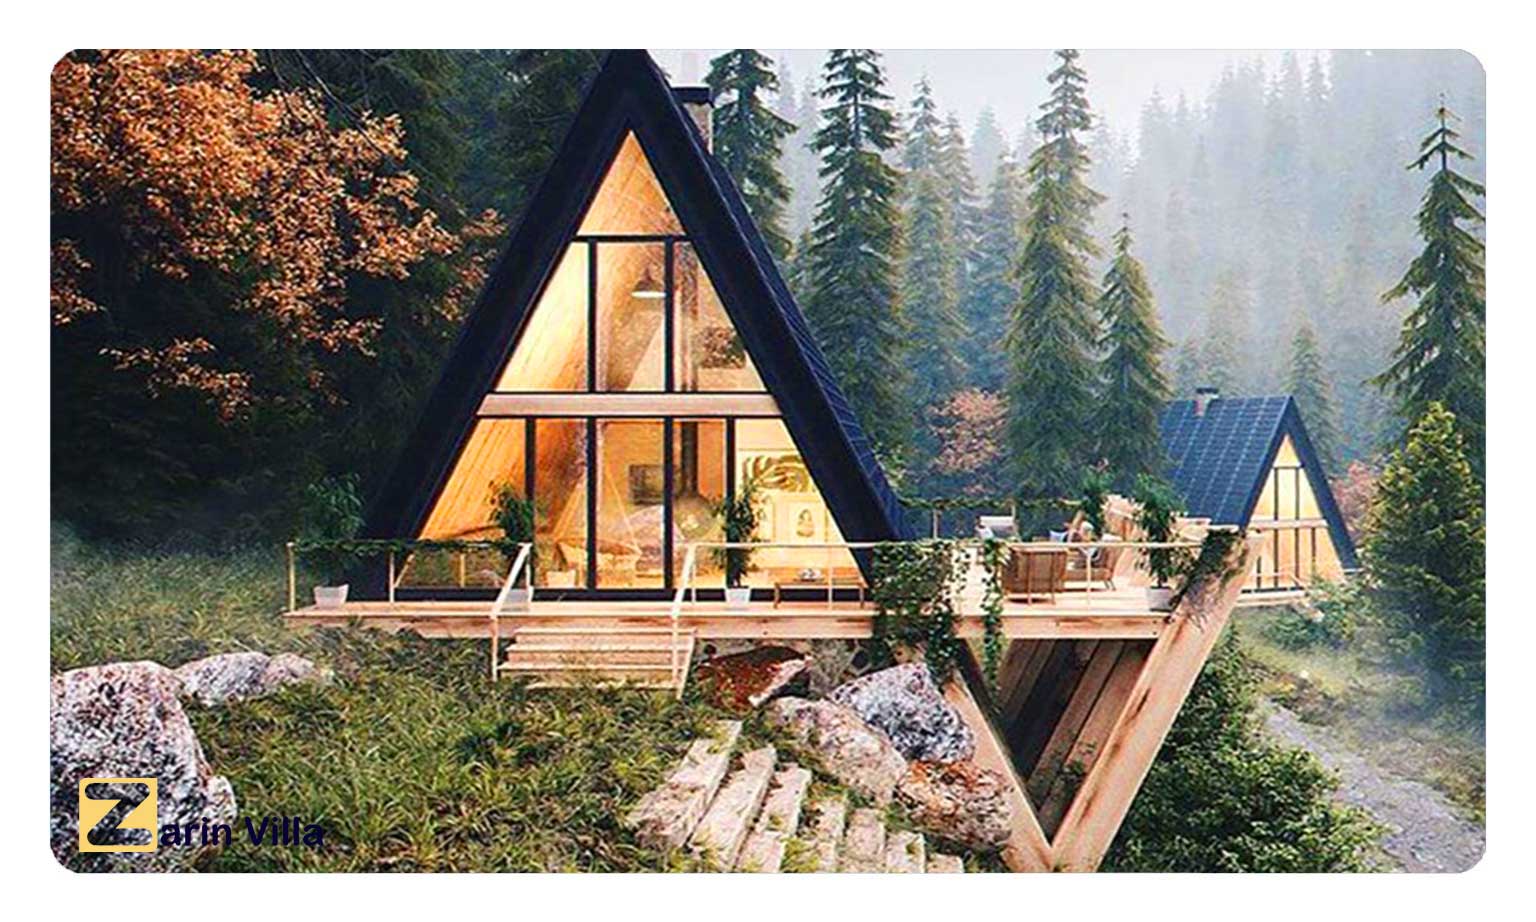 Buying a wooden house in the forest